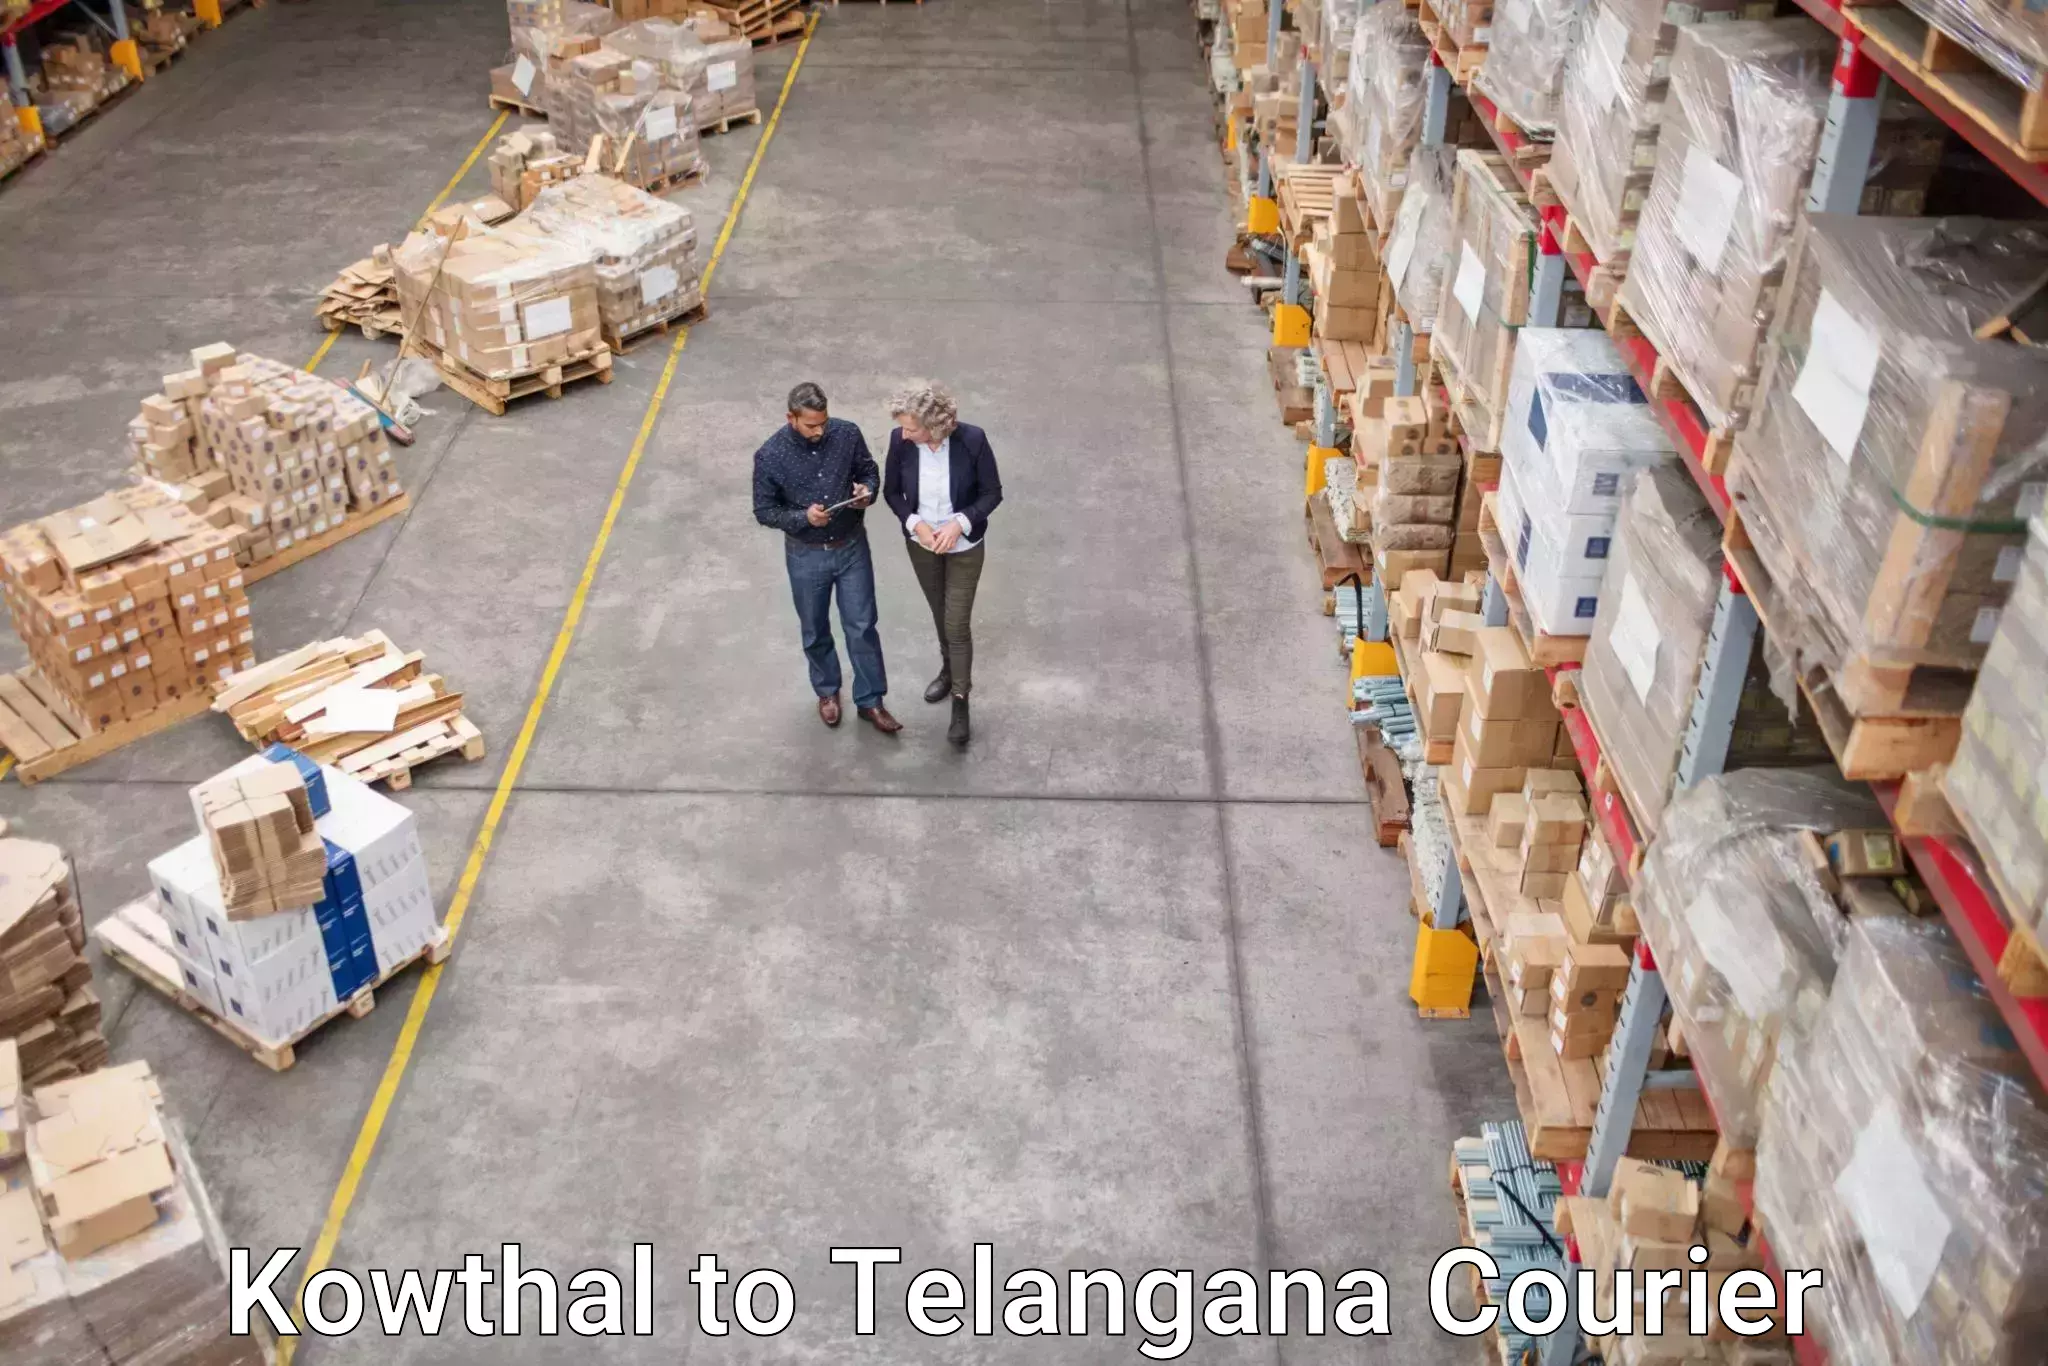 International courier networks Kowthal to Banswada